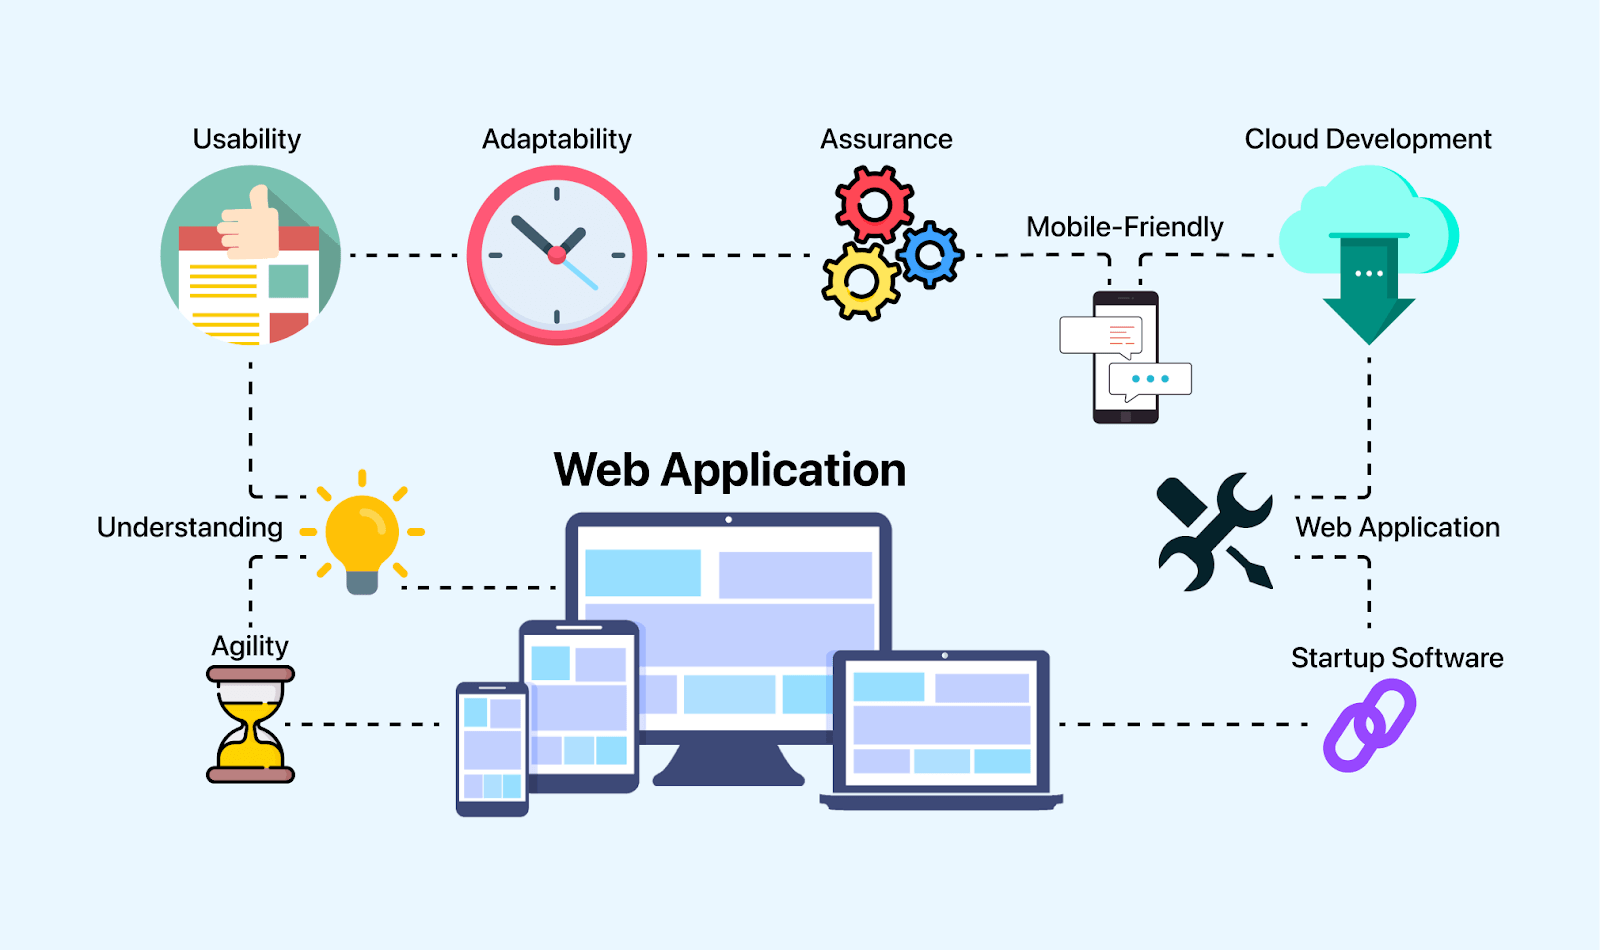 Types of Web Application Testing